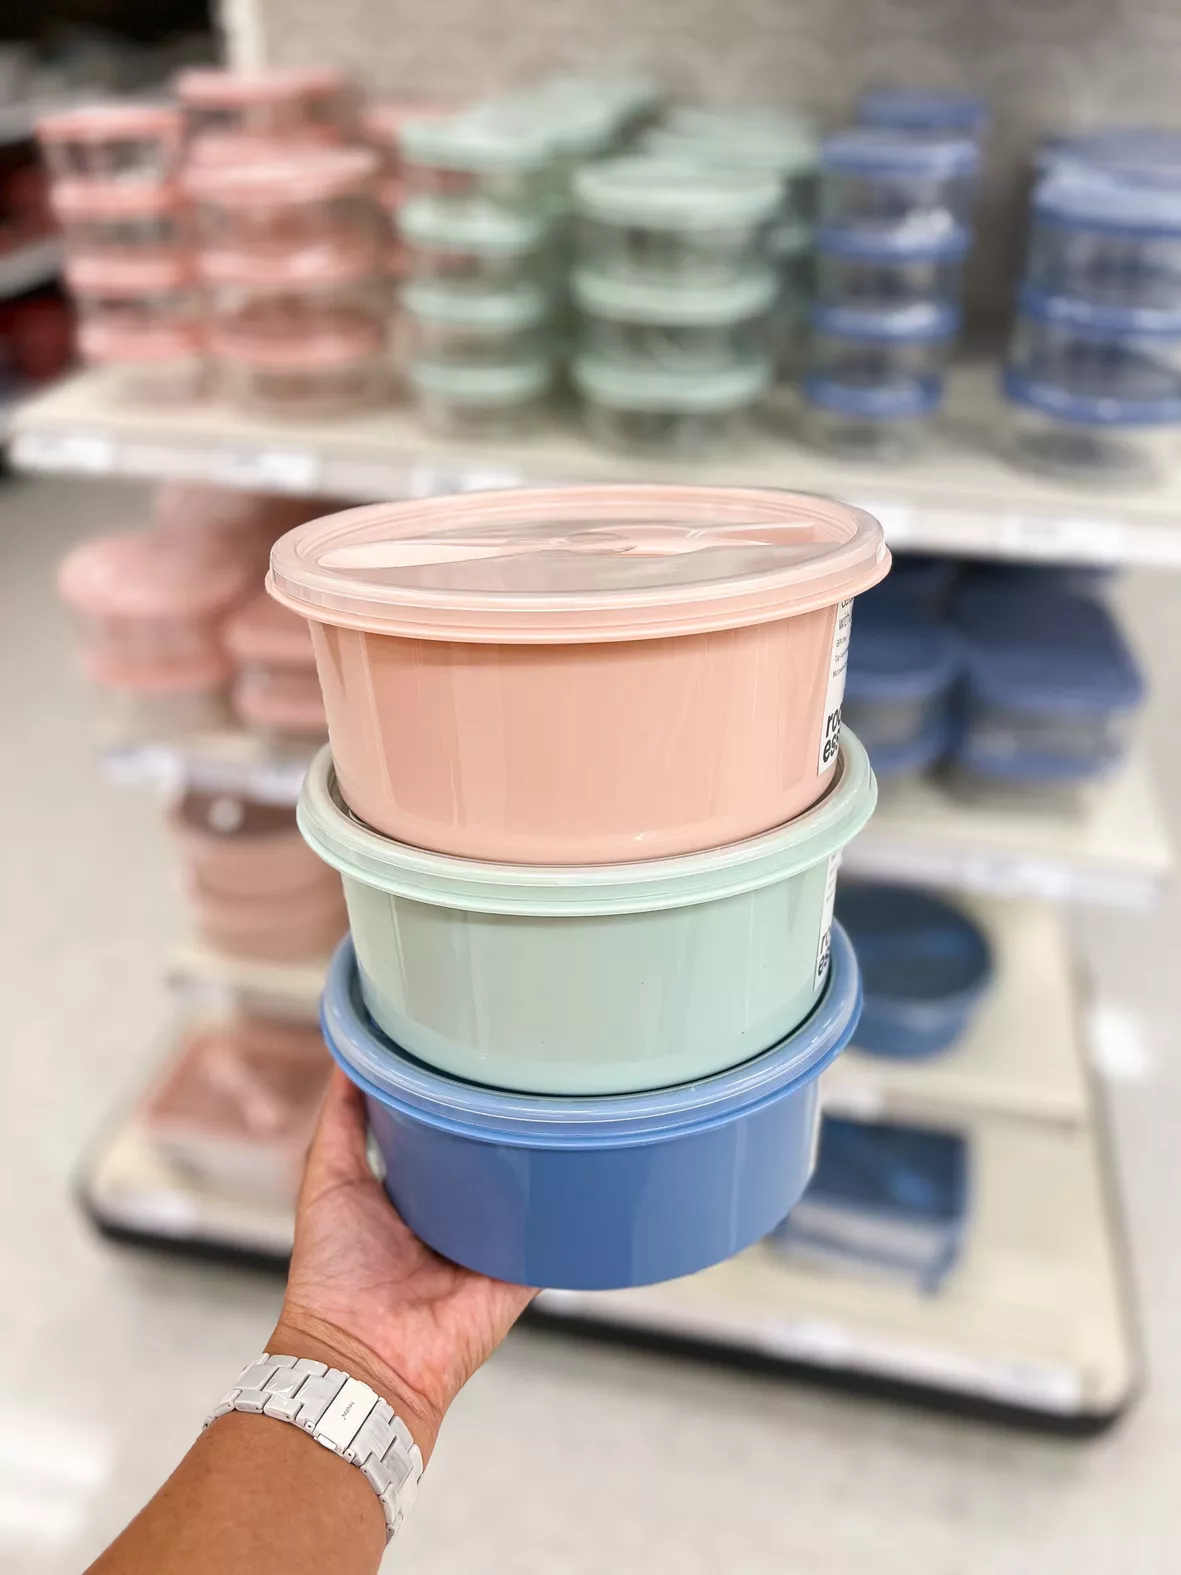 Round Food Storage Containers : Target